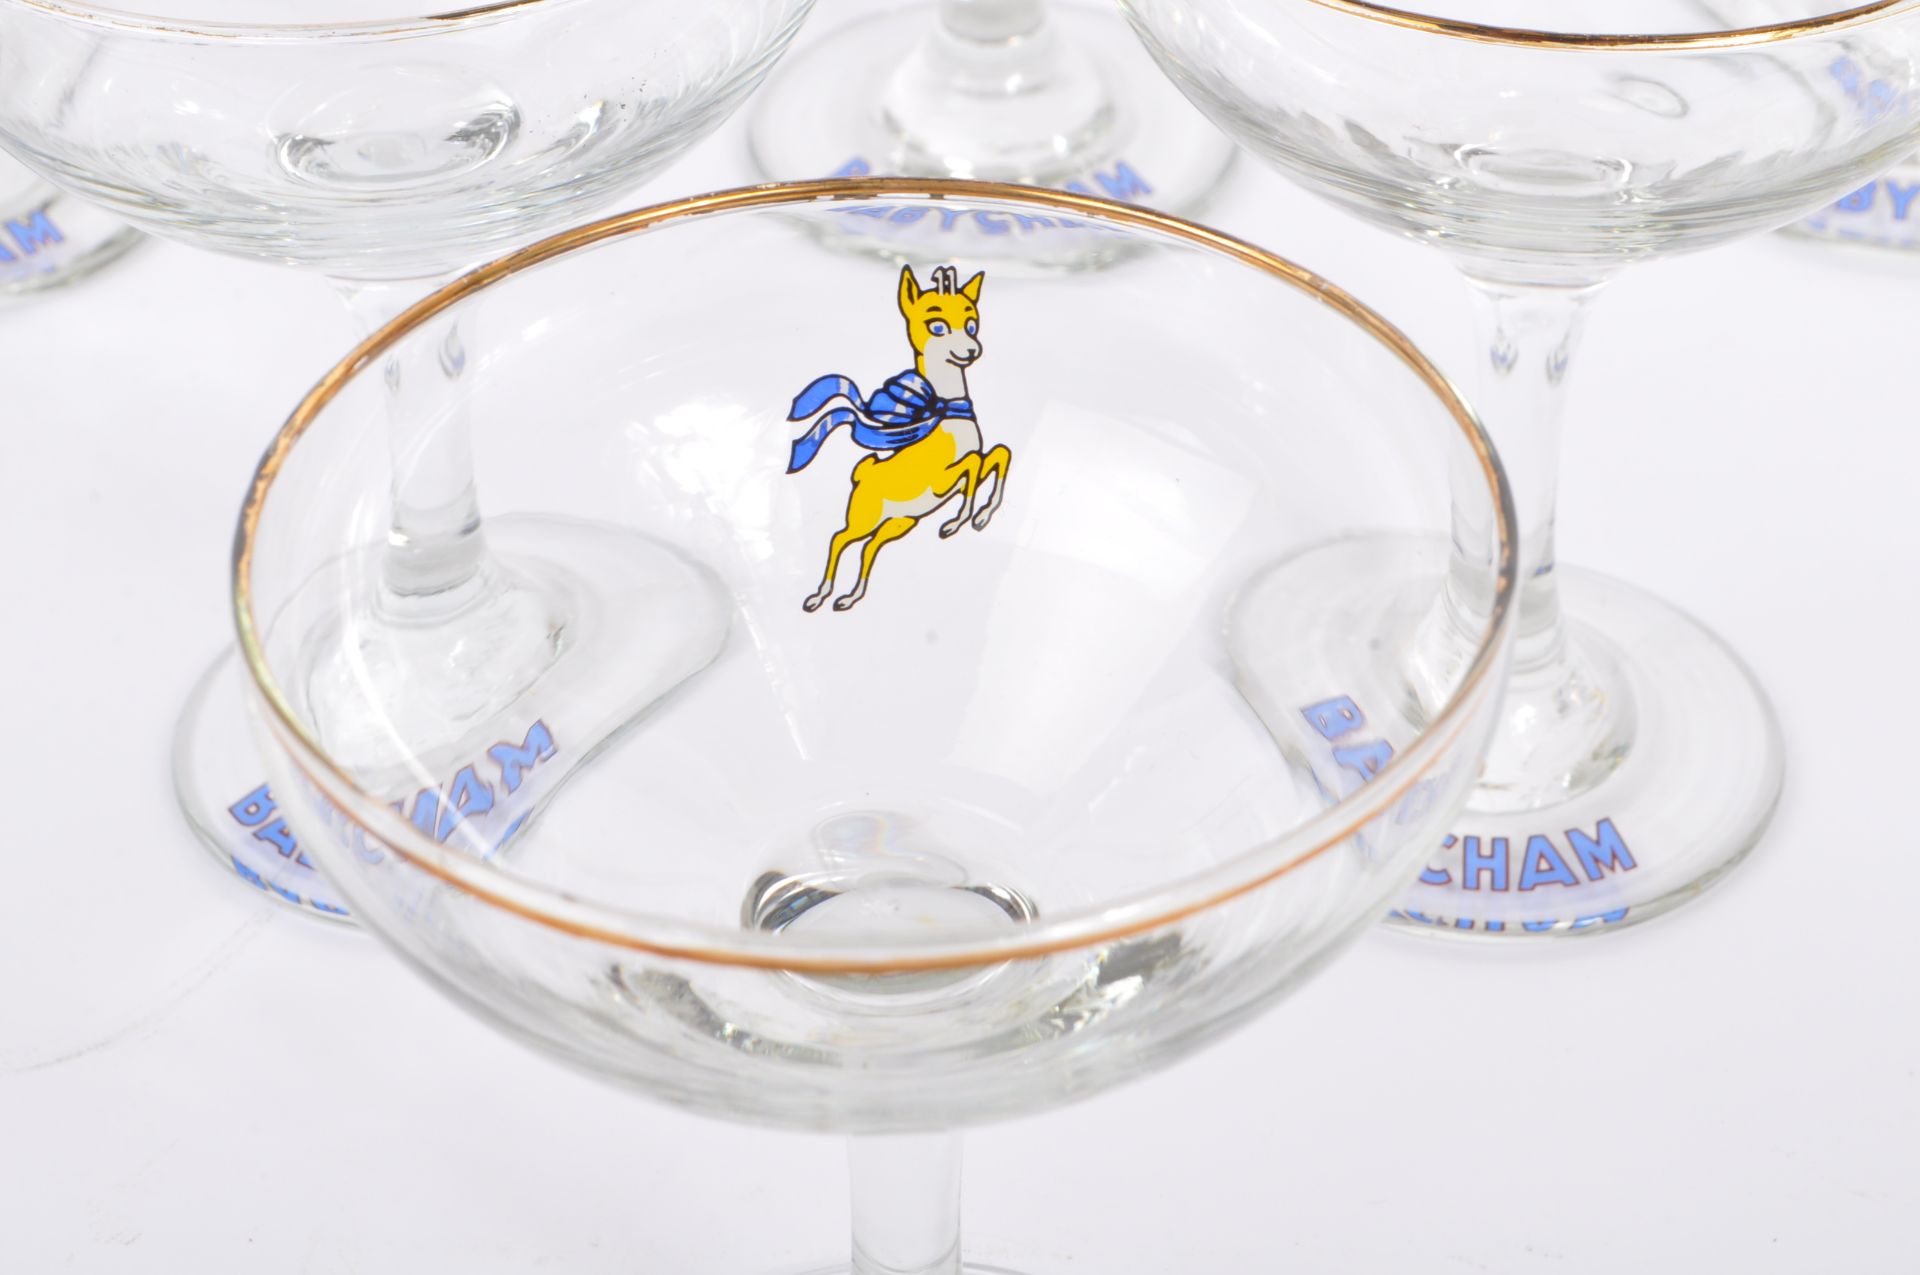 COLLECTION OF SIX VINTAGE 20TH CENTURY BABYCHAM GLASSES - Image 3 of 6